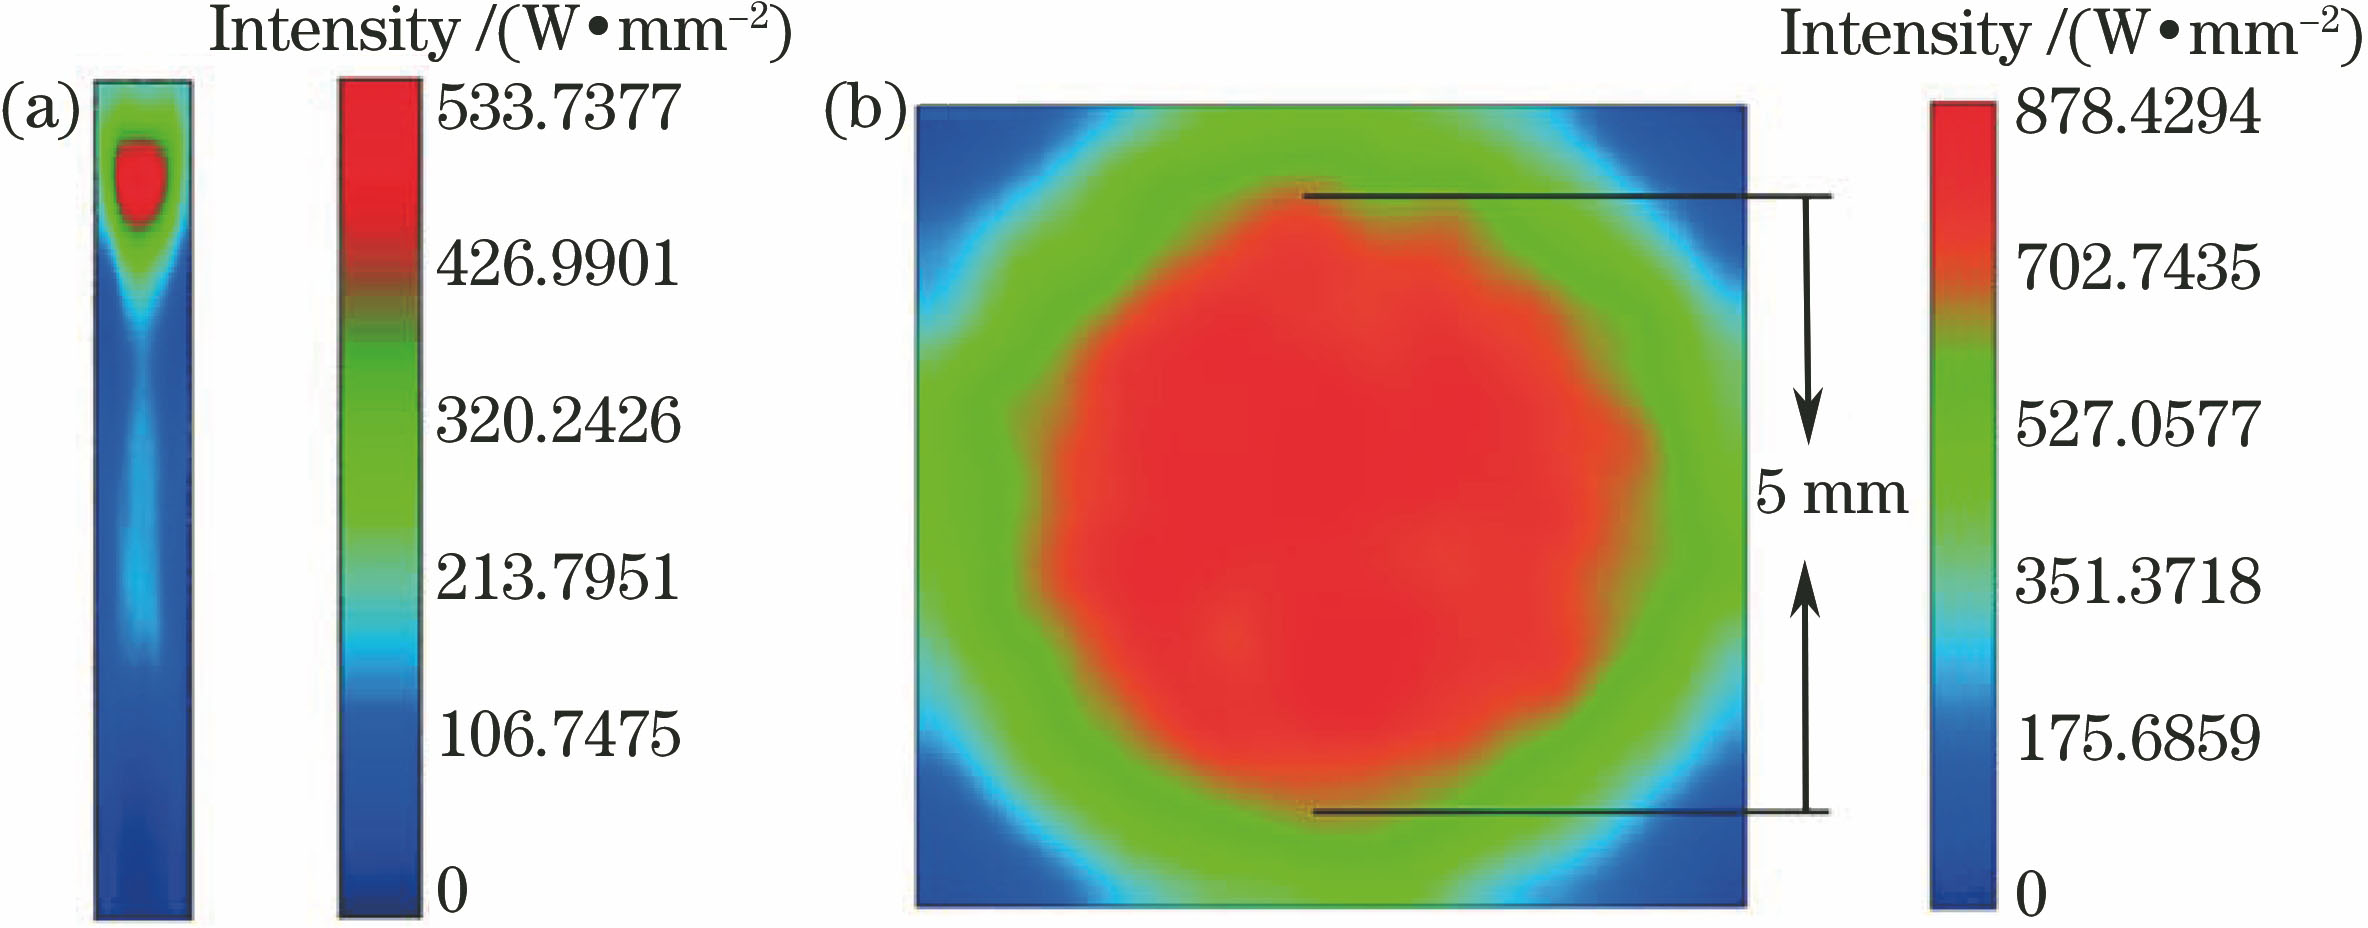 (a) Pumping power distribution on the center tangent plane of crystal detected by ZEMAX detectors;(b) pumping power distribution on the front end face